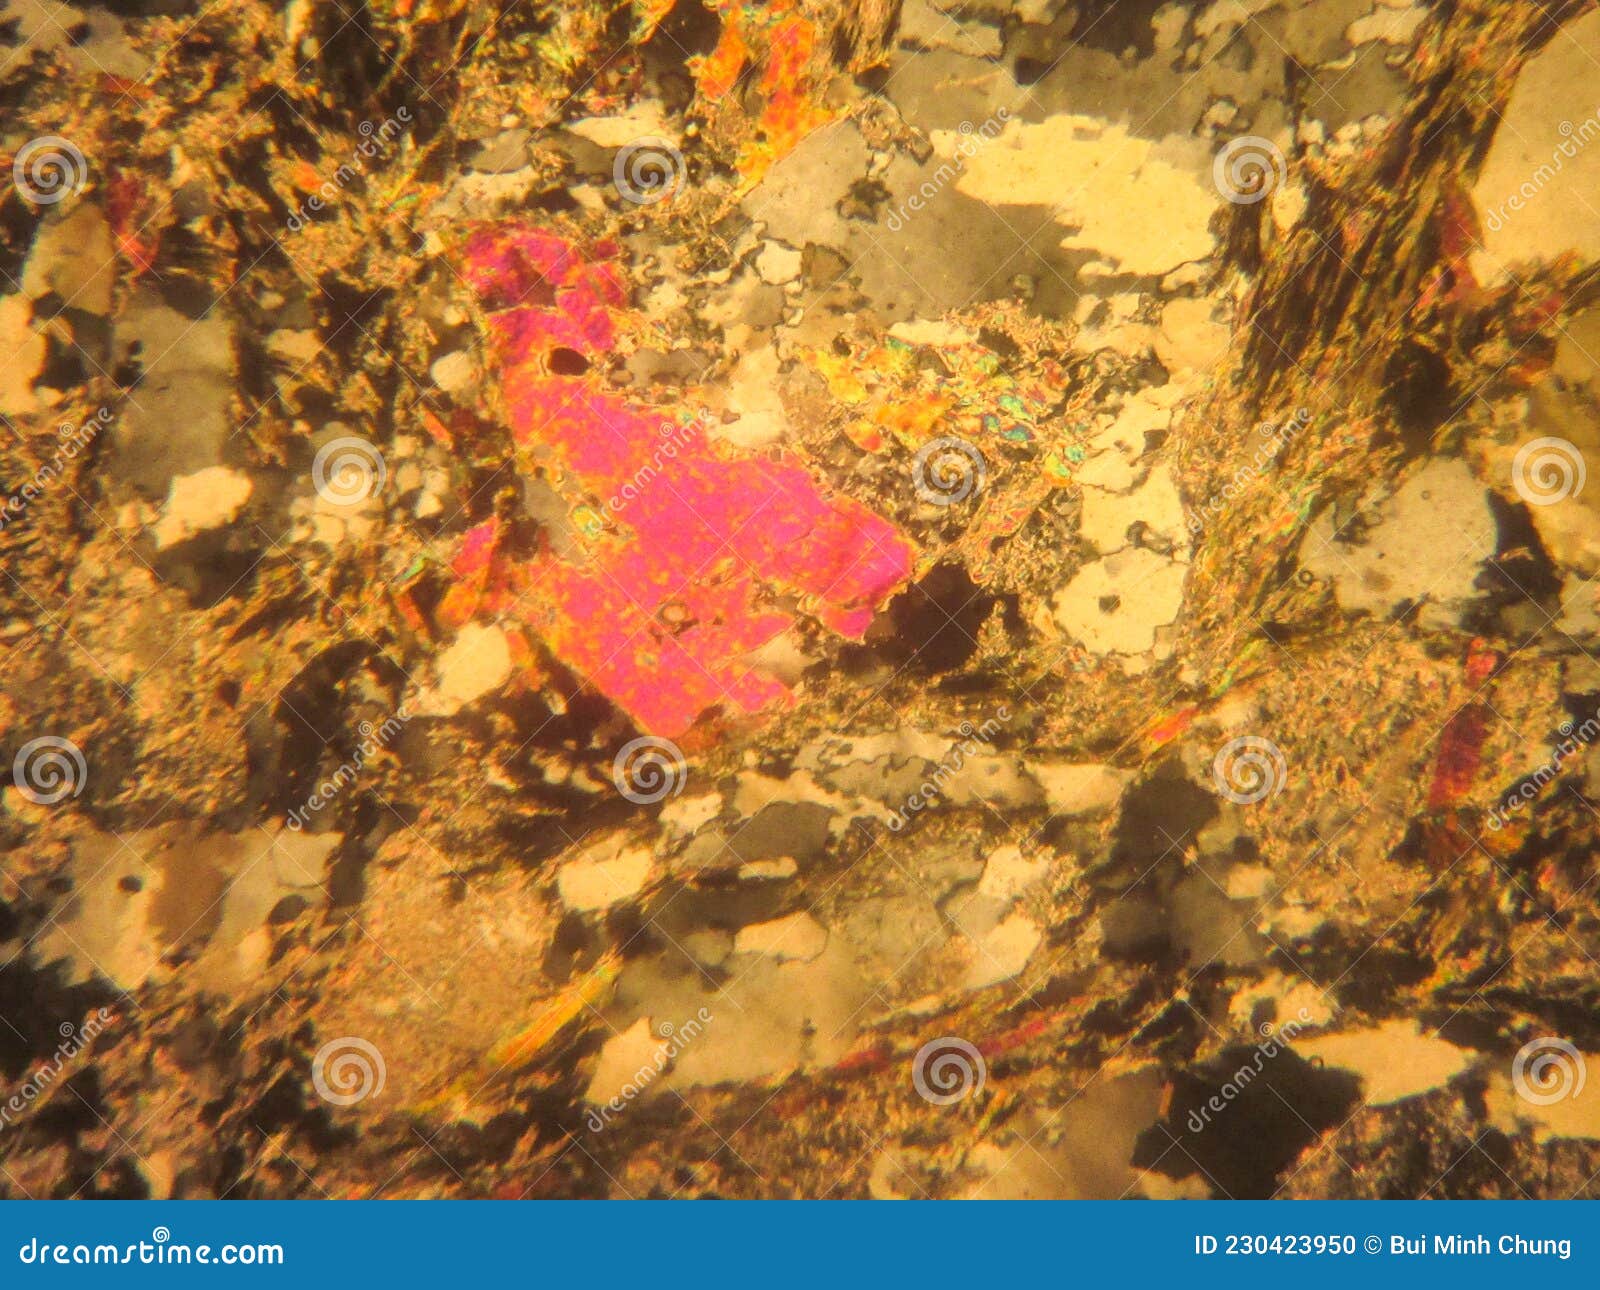 photo of the optical mineralogy and thin section microscopy of petrography